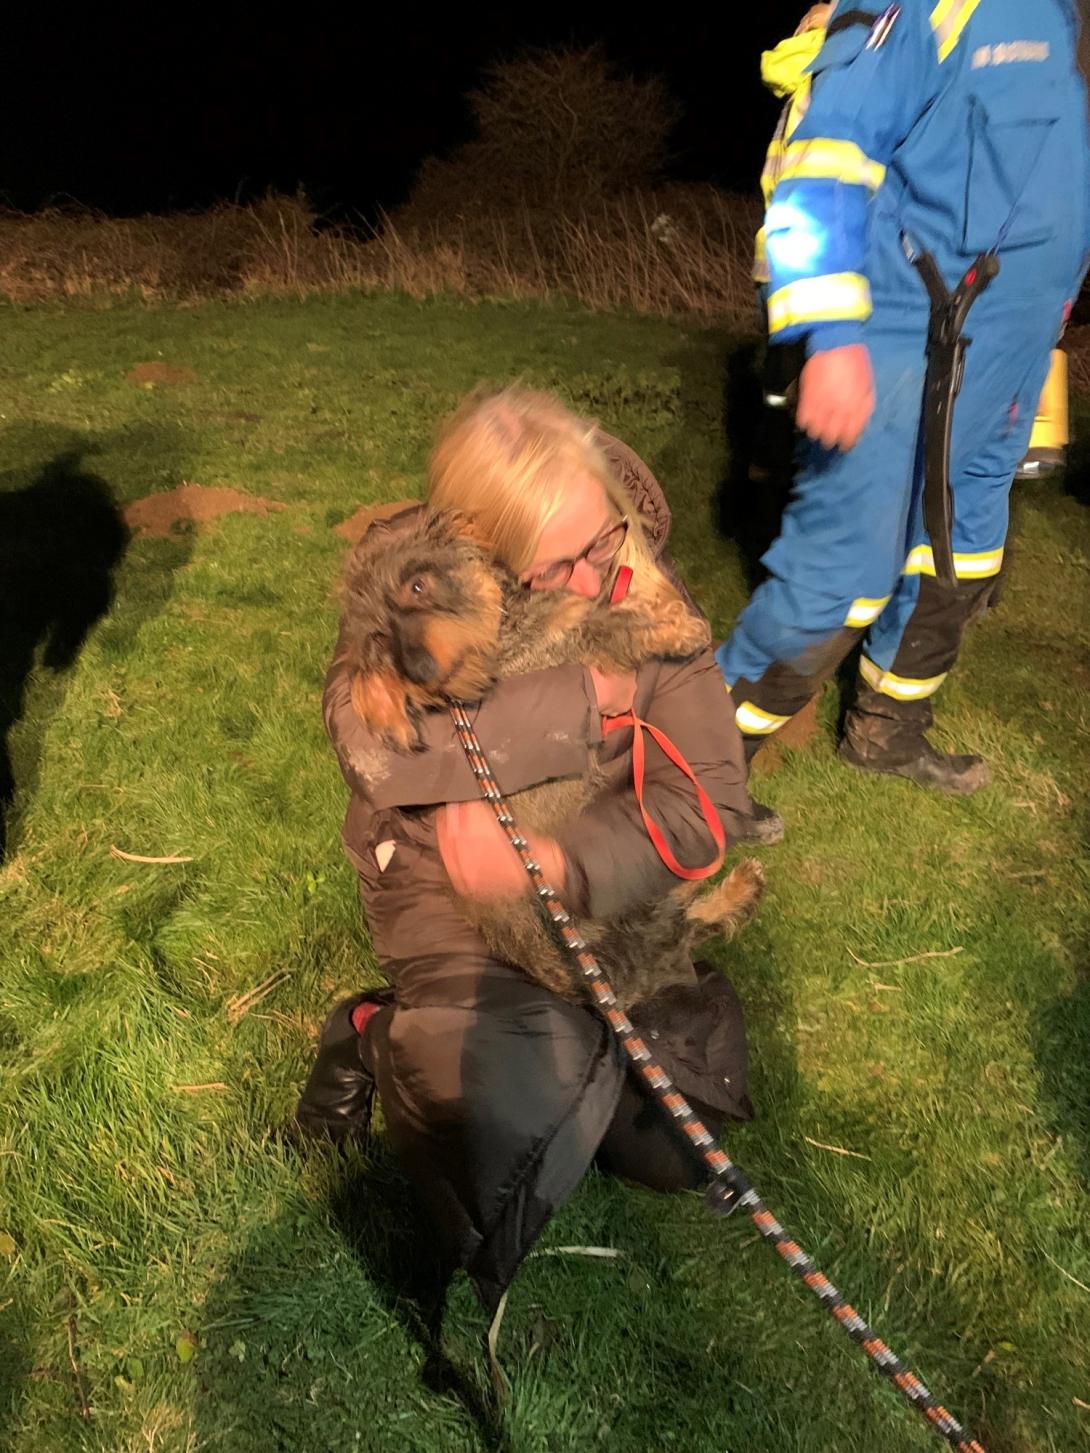 Bear the dog was rescued by crews in Capel-le-Ferne, Folkestone.